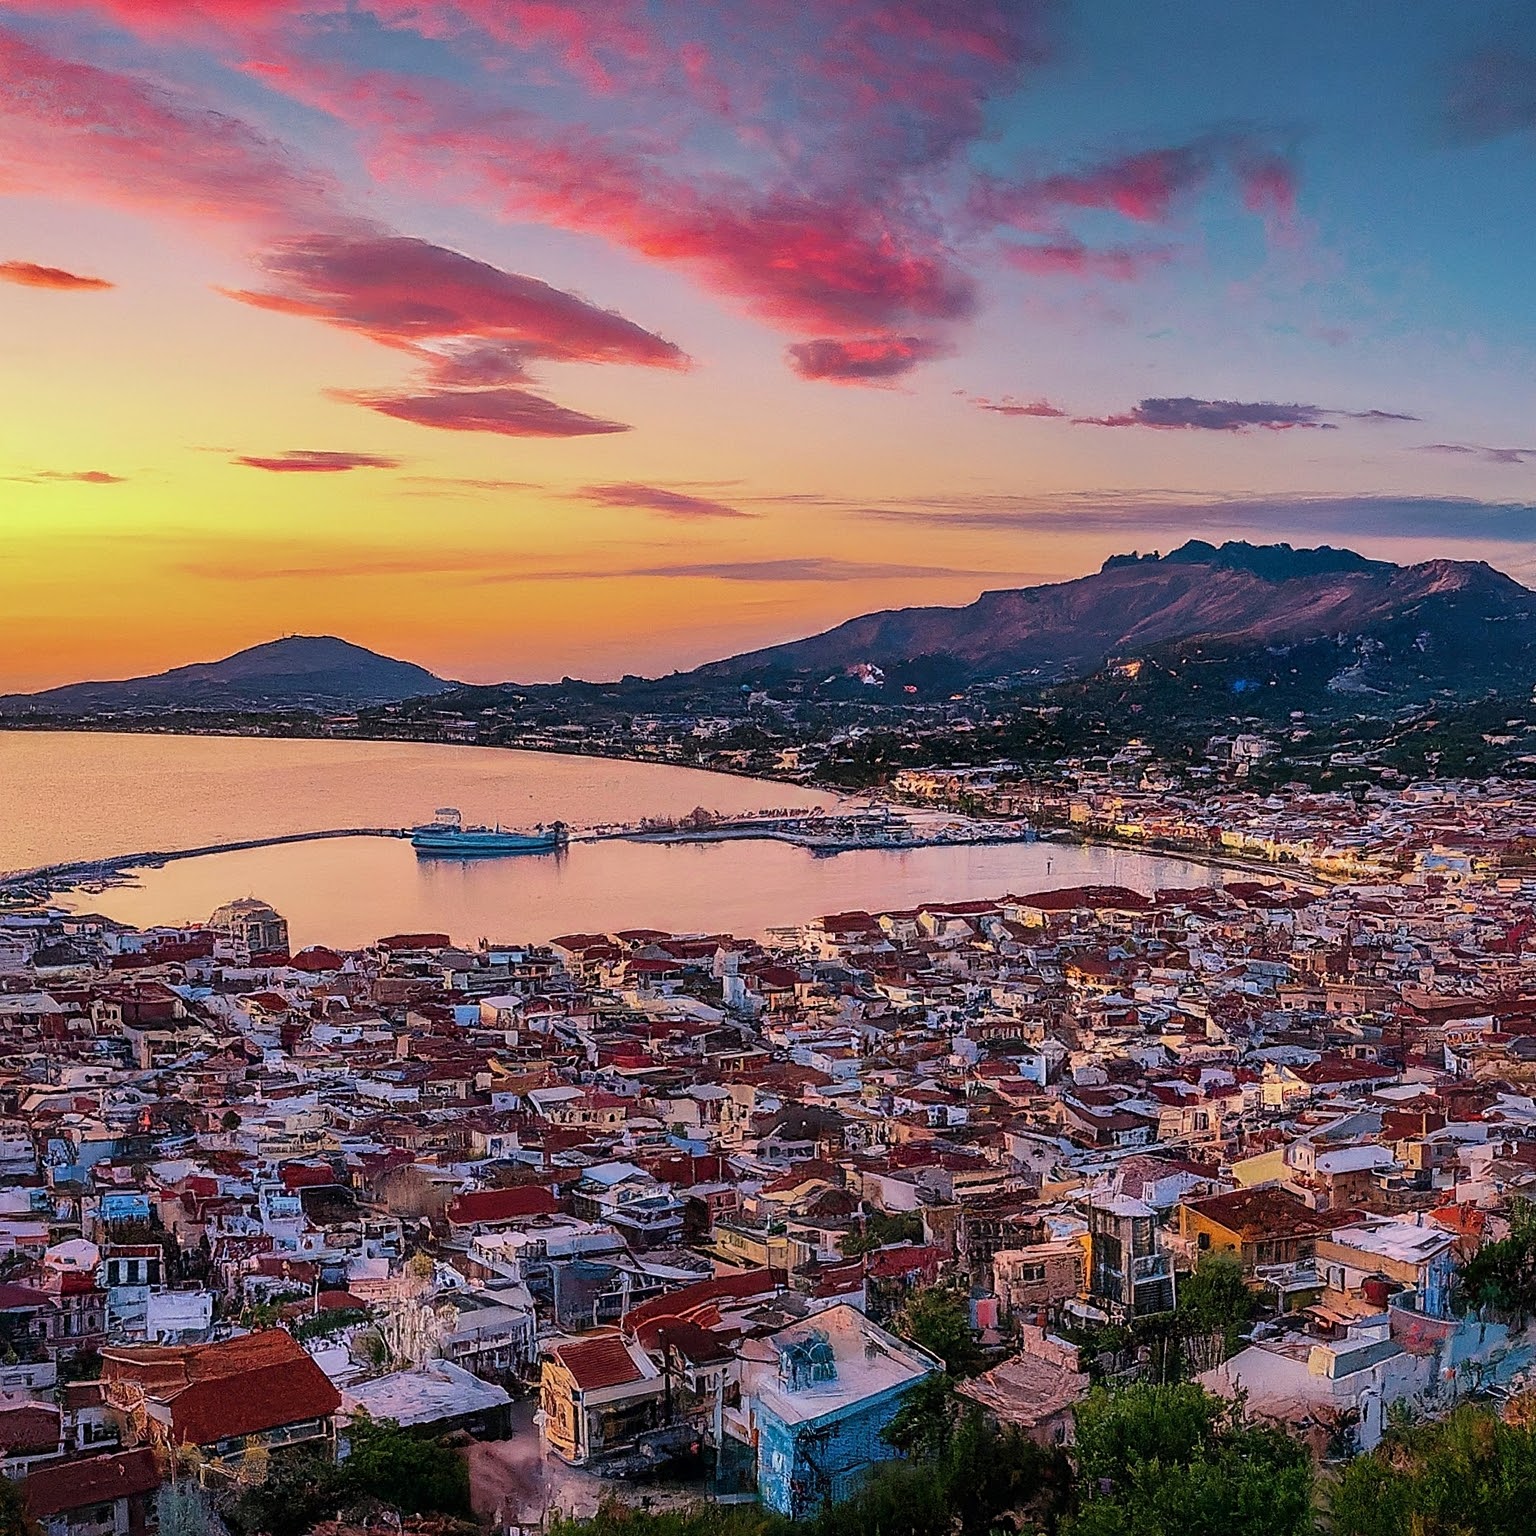 Vibrant sunset over Zakynthos Town, Greece, with colorful houses and sailboats in harbor.